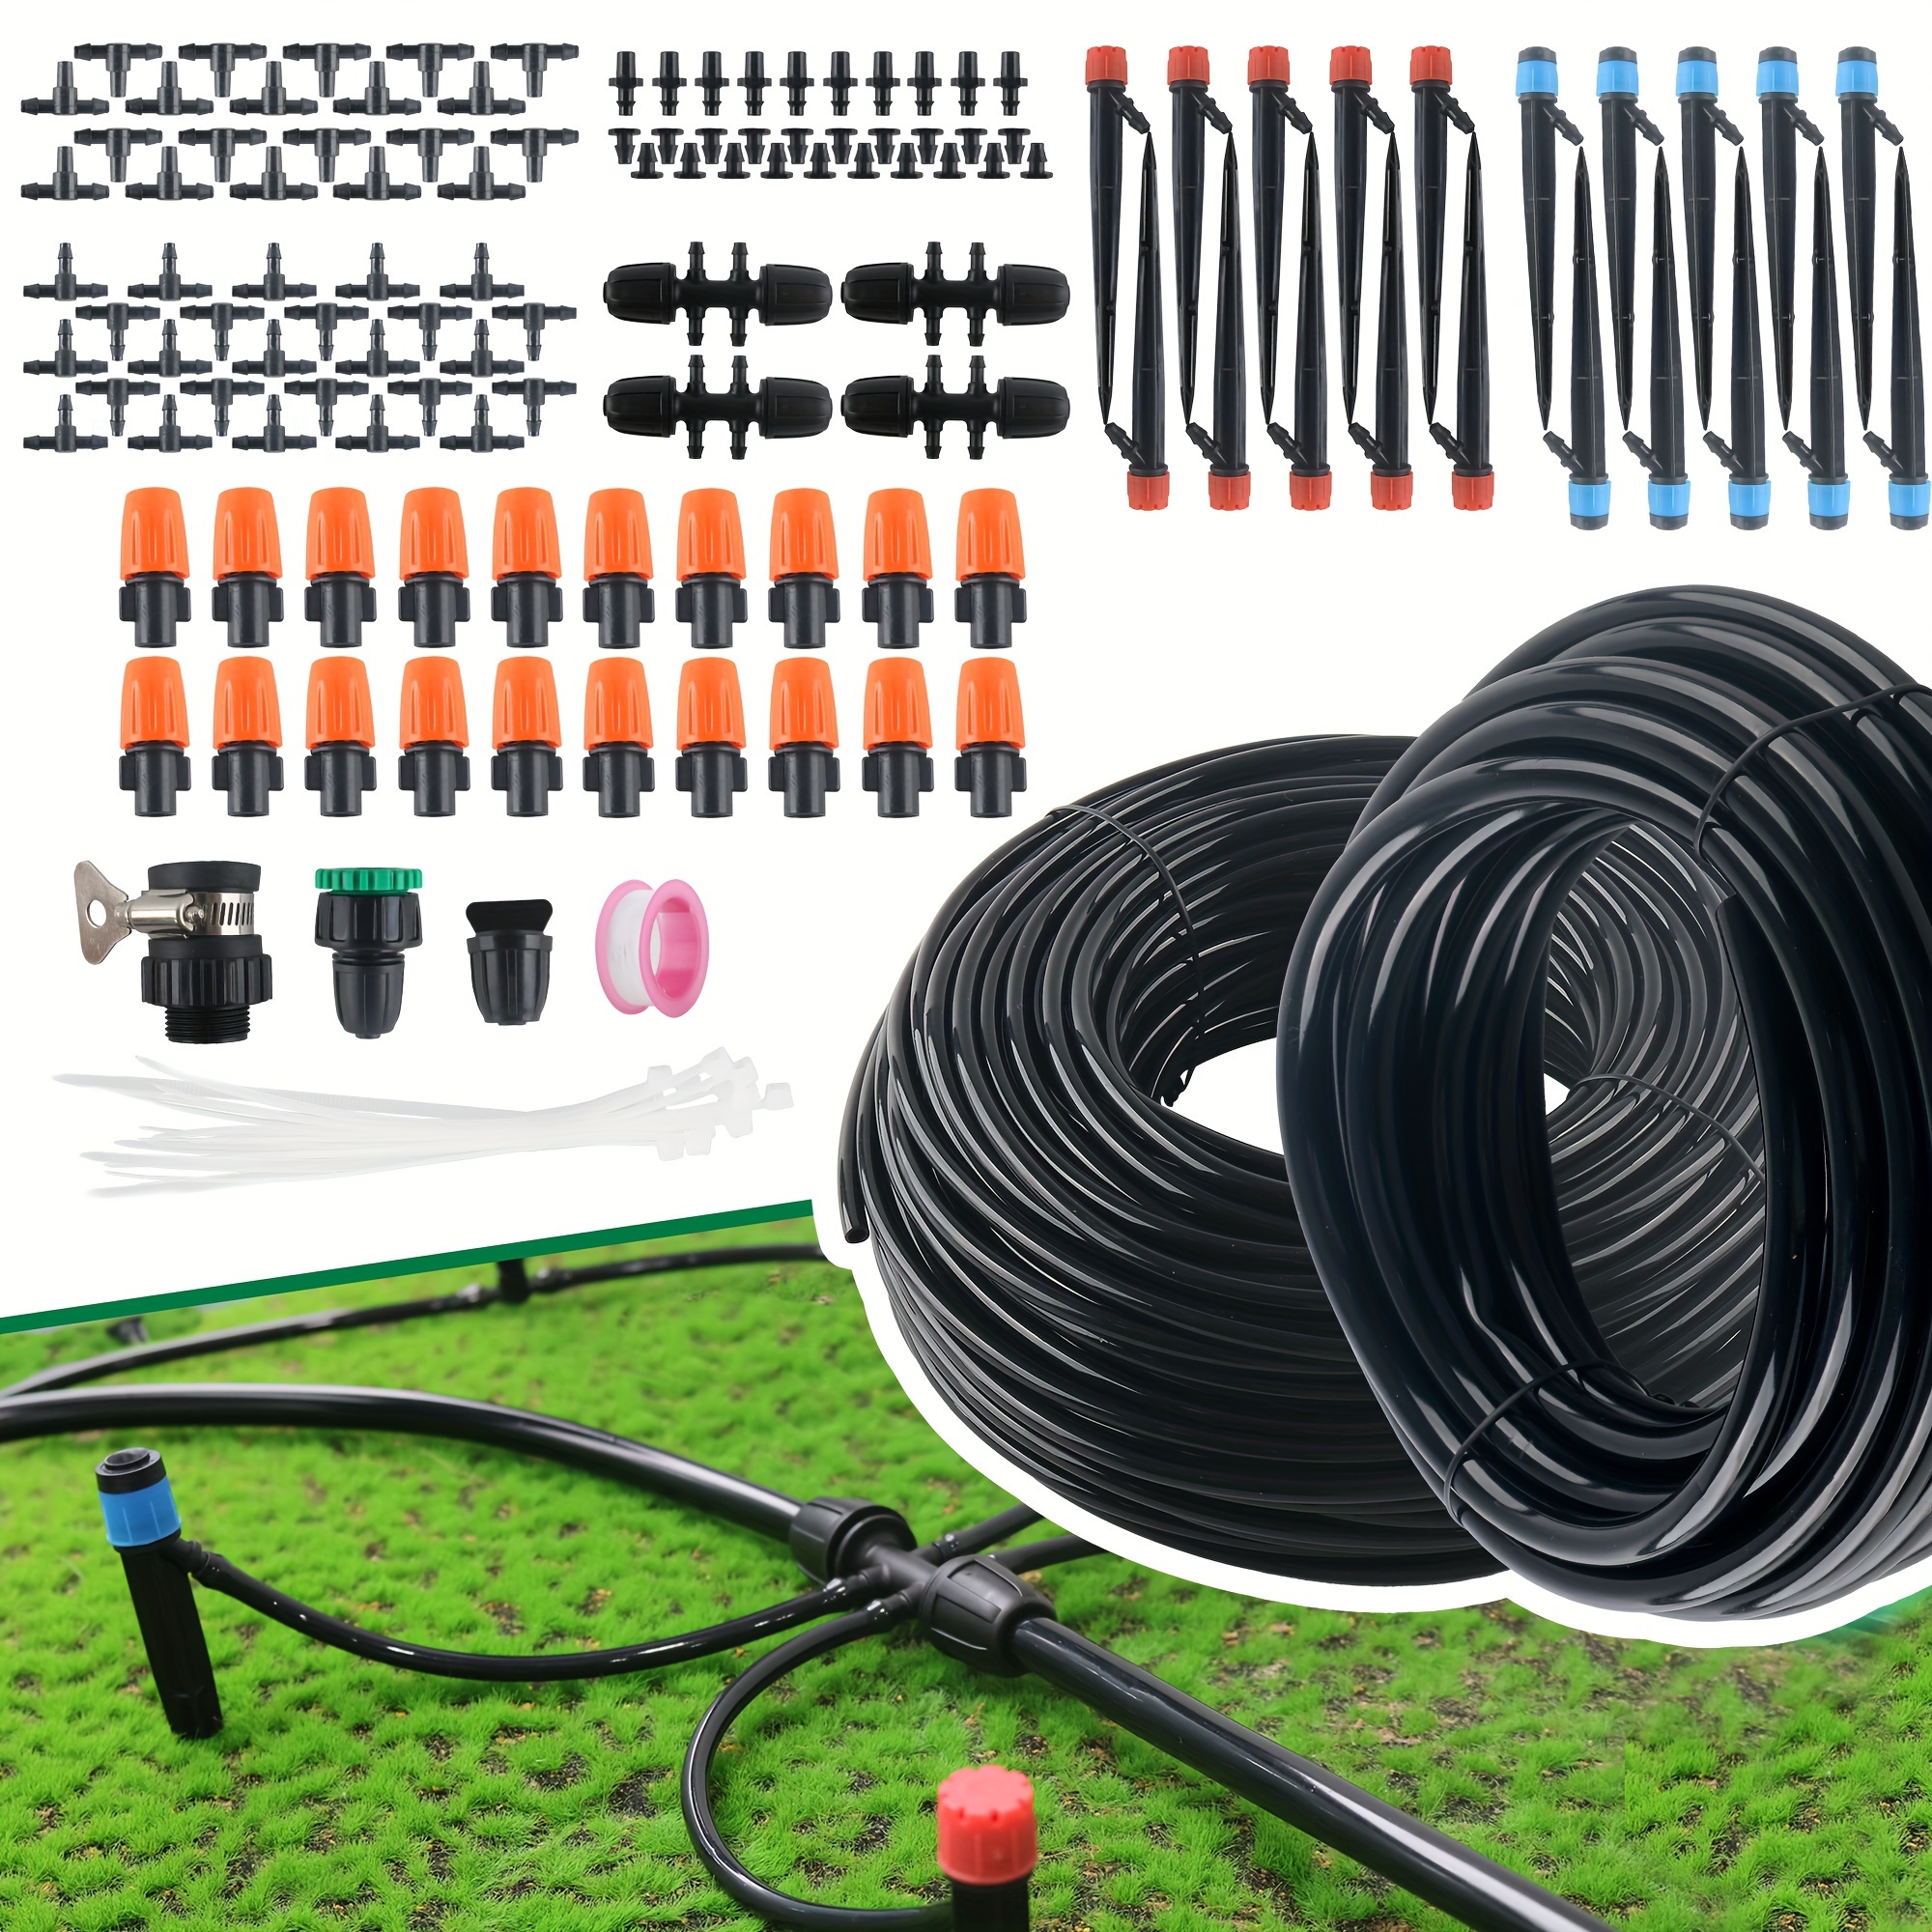 

226ft Greenhouse Micro Drip Irrigation Kit Automatic Irrigation System Patio Misting Plant Watering System With 1/4 Inch 1/2 Inch Irrigation Tubing Hose Adjustable Nozzle Emitters Barbed Fittings